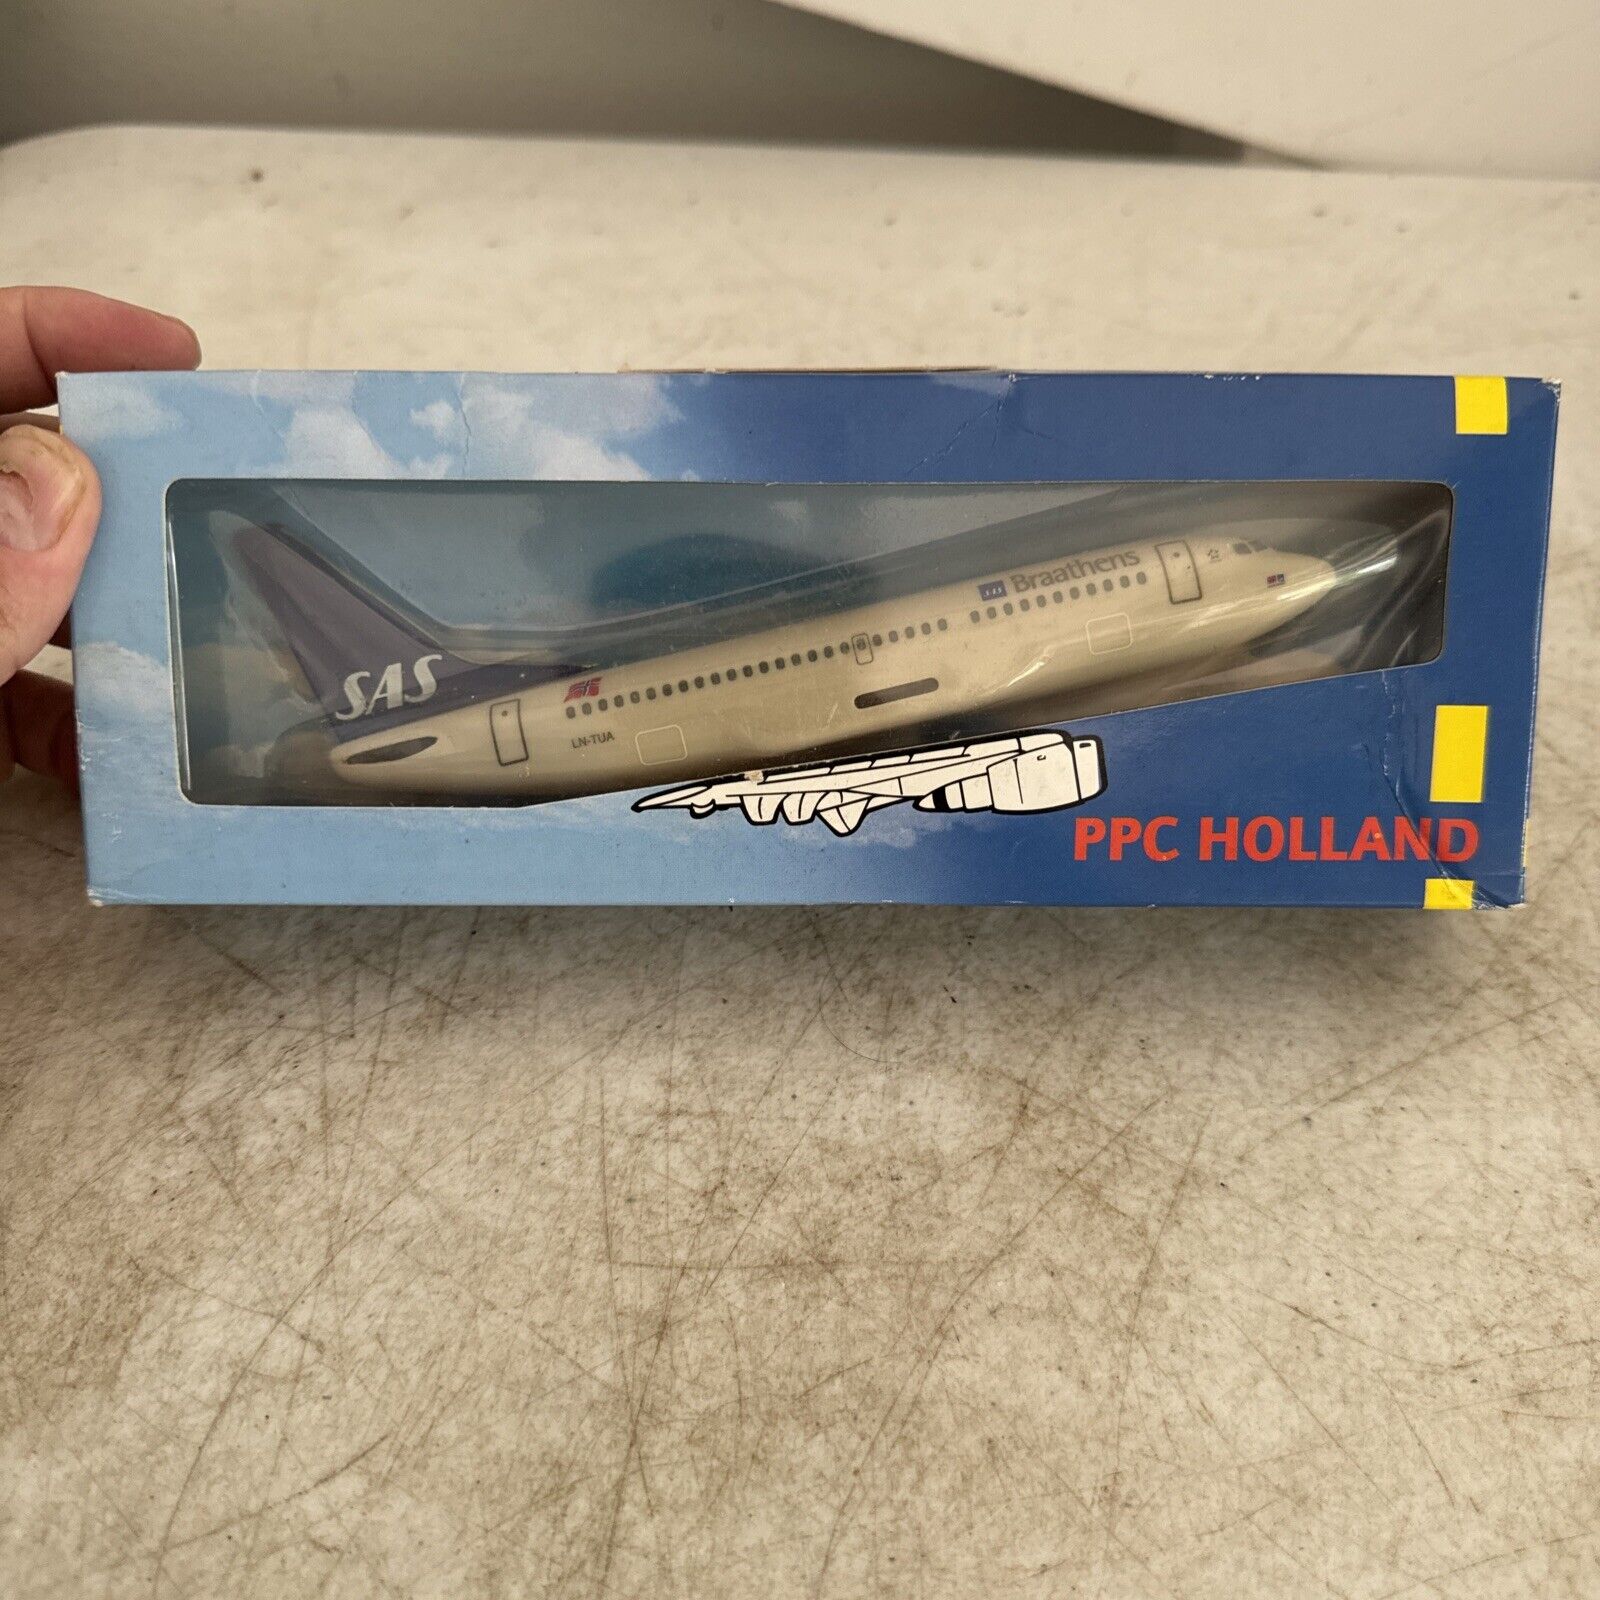 New SAS Scandinavian Airlines PPC Holland snap-fit model